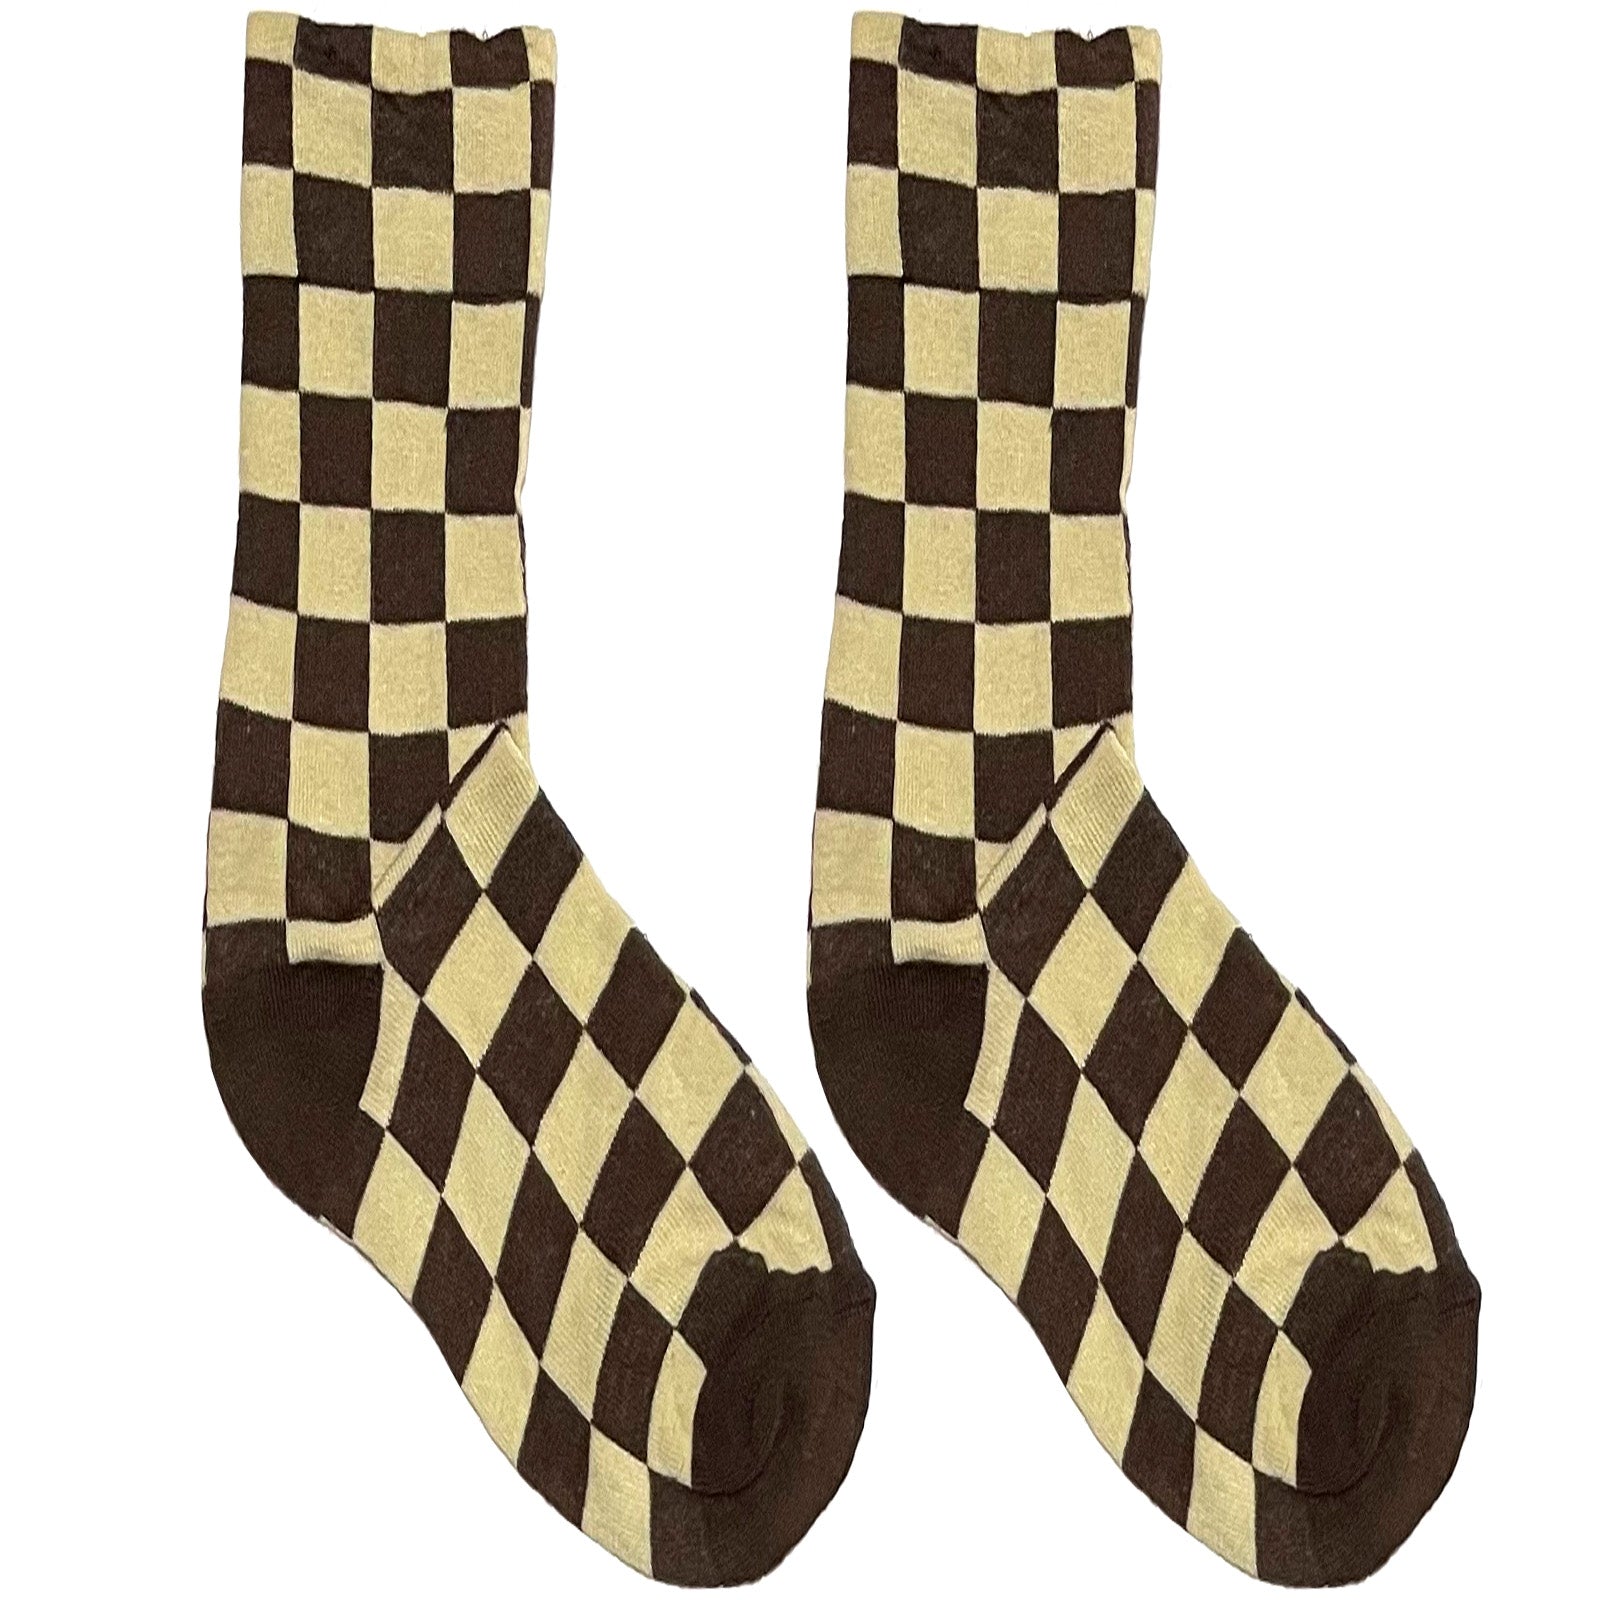 Off White And Brown Chequered Short Crew Socks